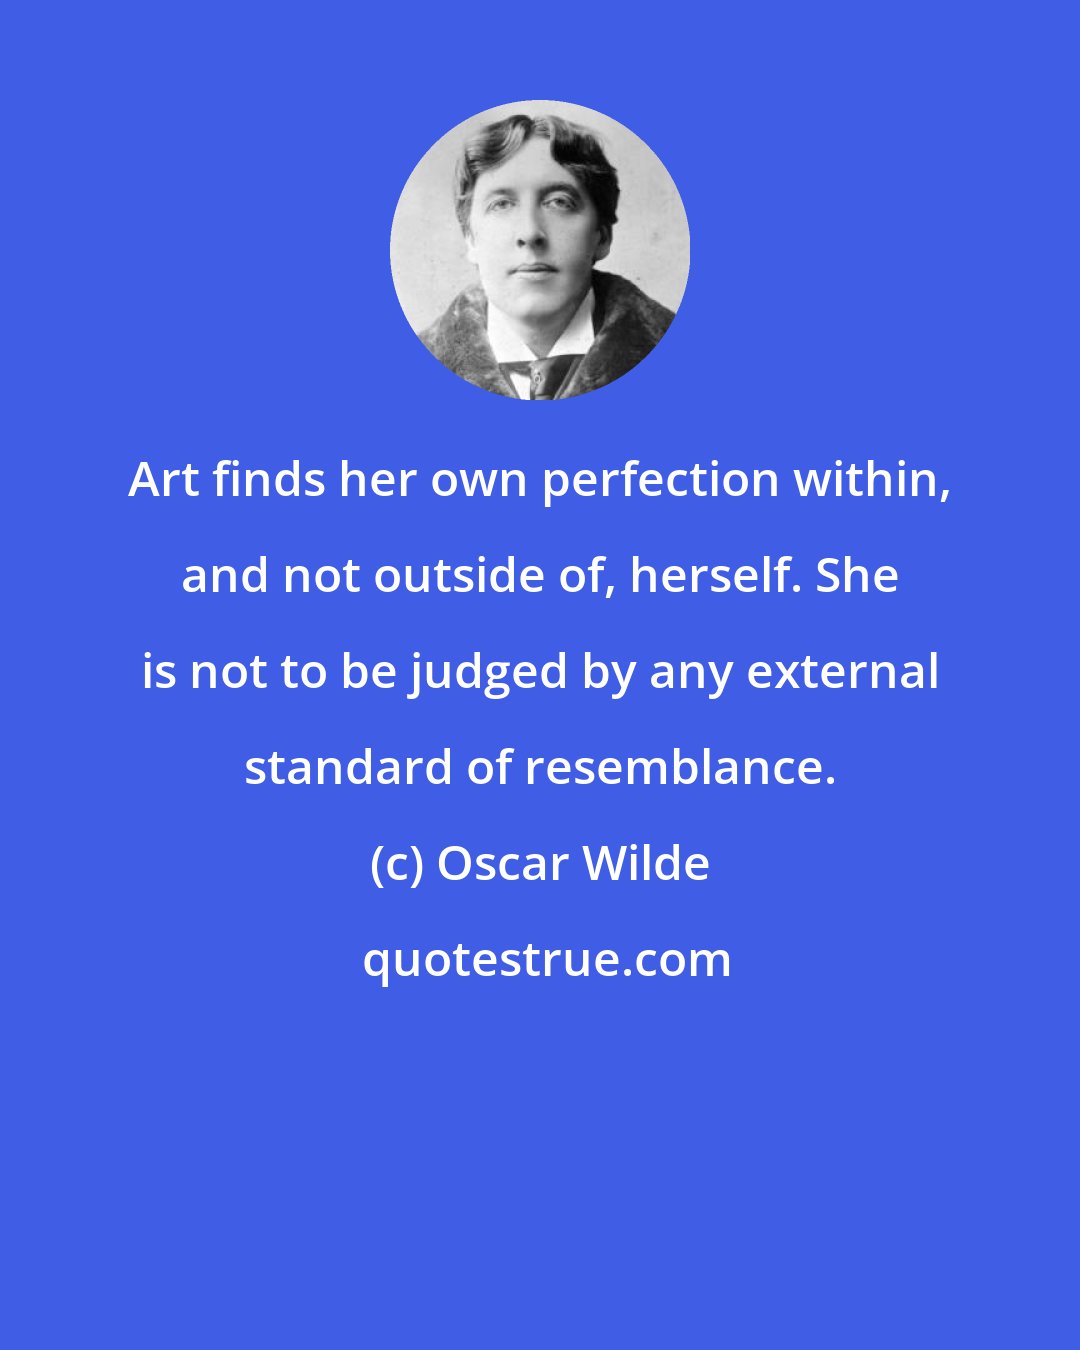 Oscar Wilde: Art finds her own perfection within, and not outside of, herself. She is not to be judged by any external standard of resemblance.